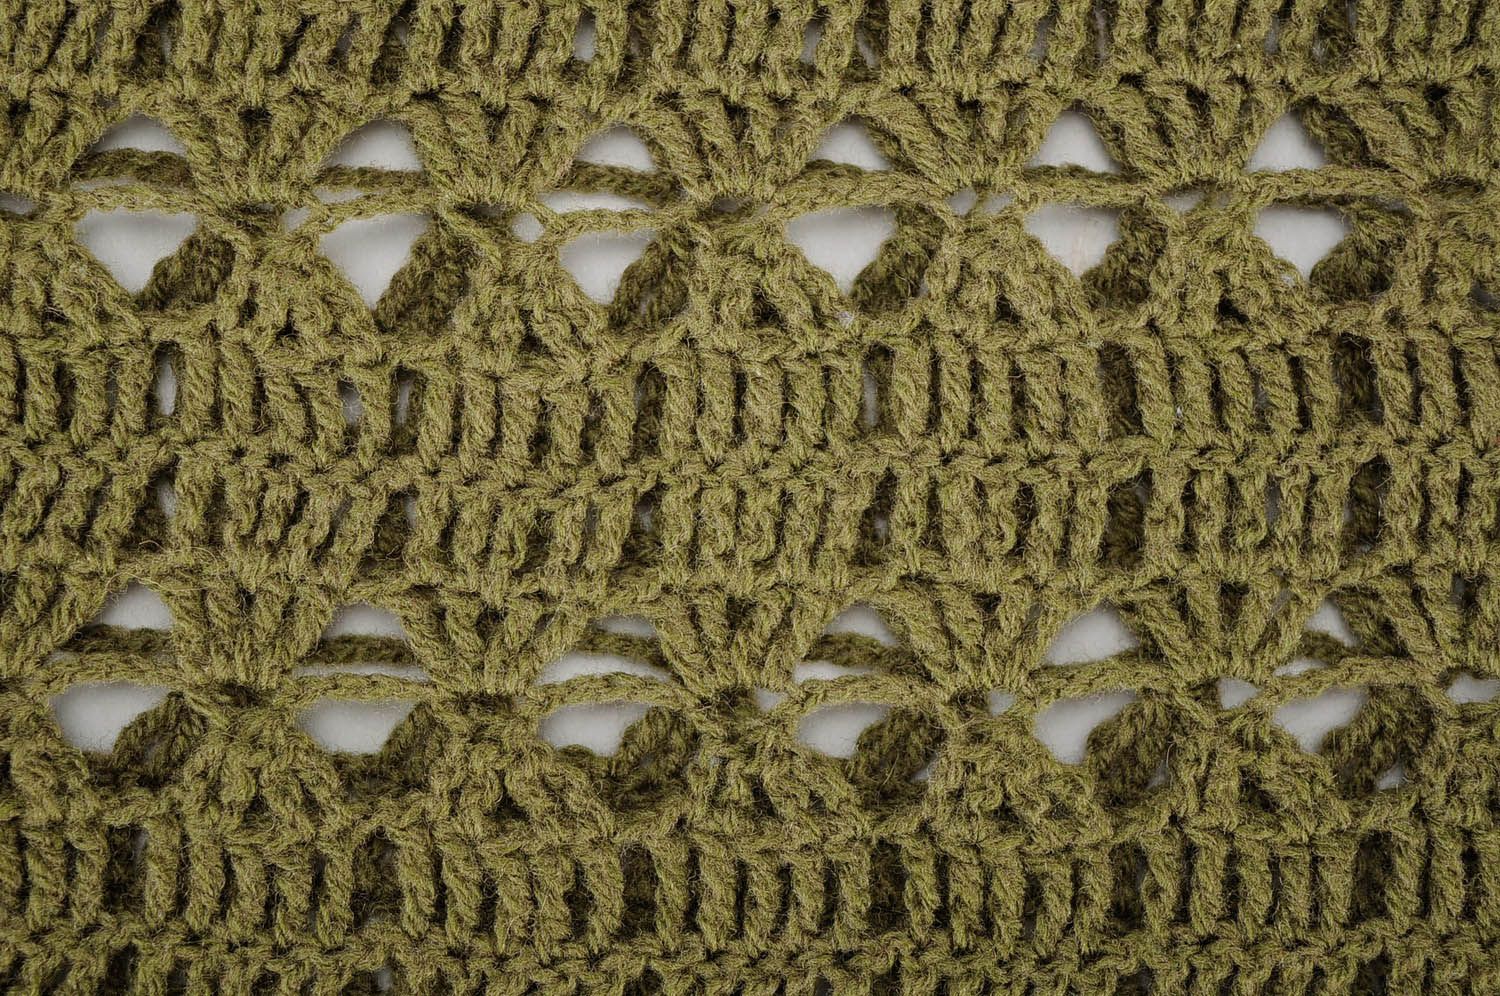 Crocheted tunic of olive color photo 5